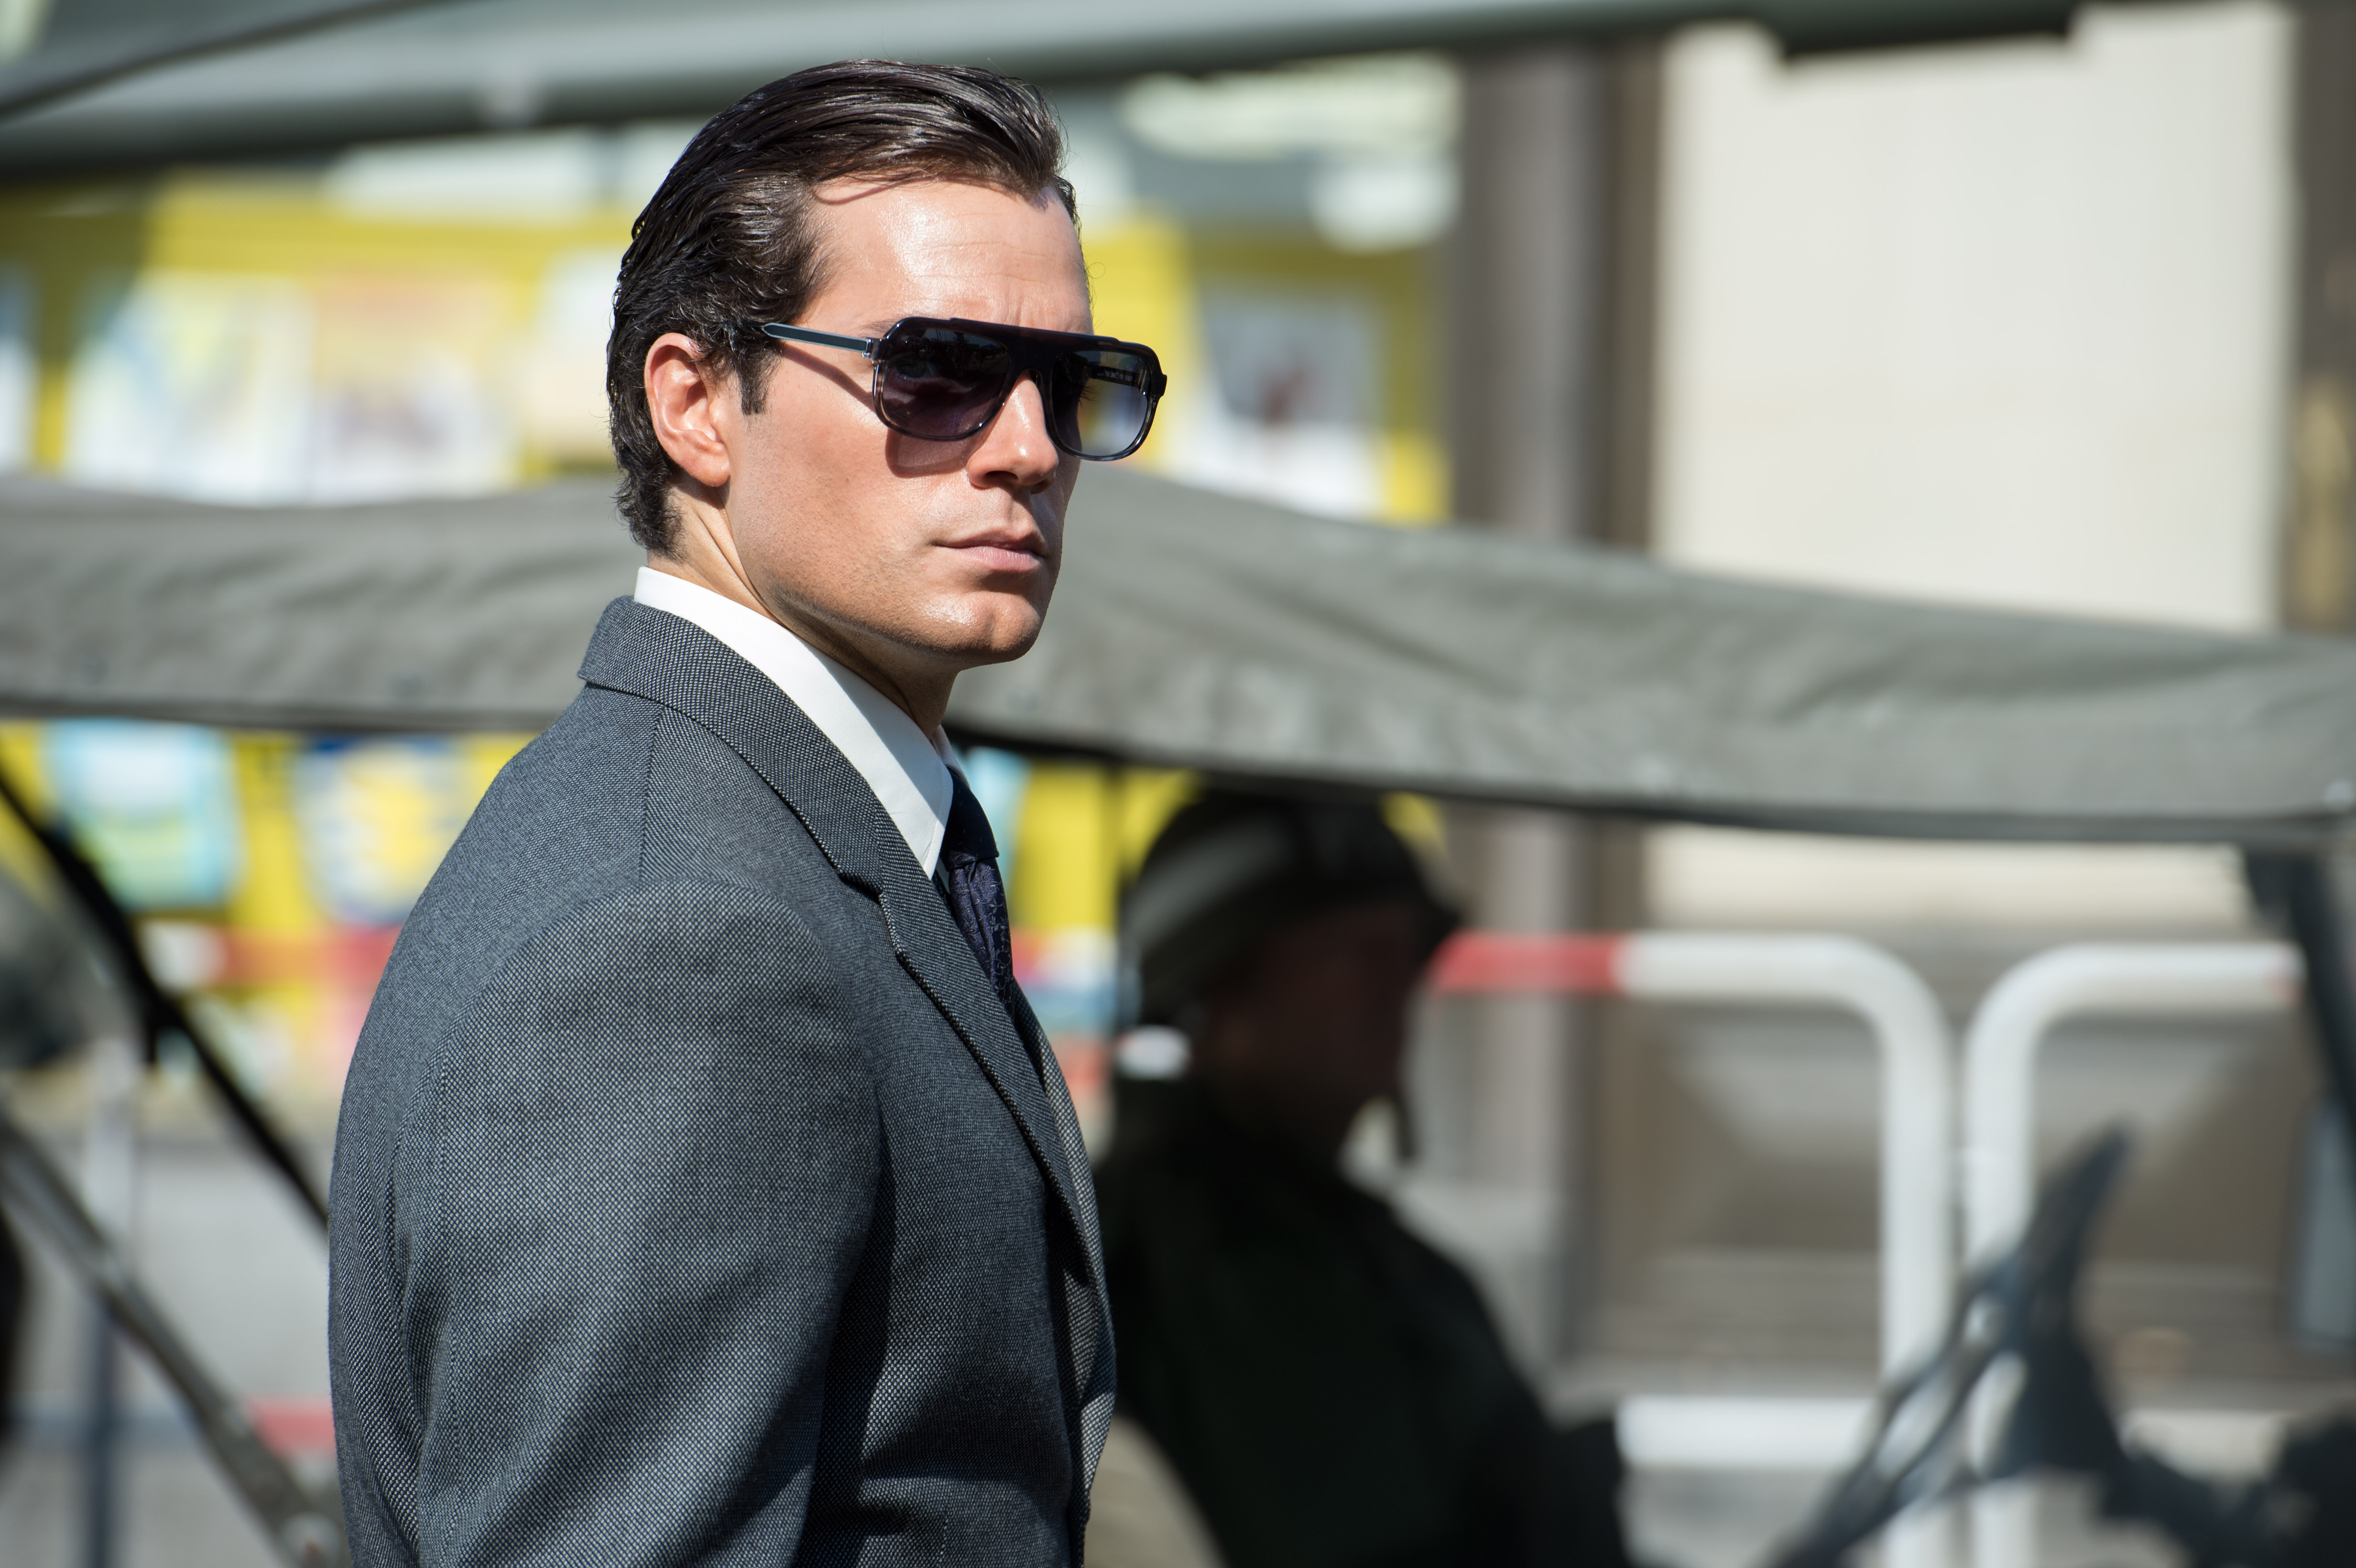 The Man From U.N.C.L.E. Wallpapers